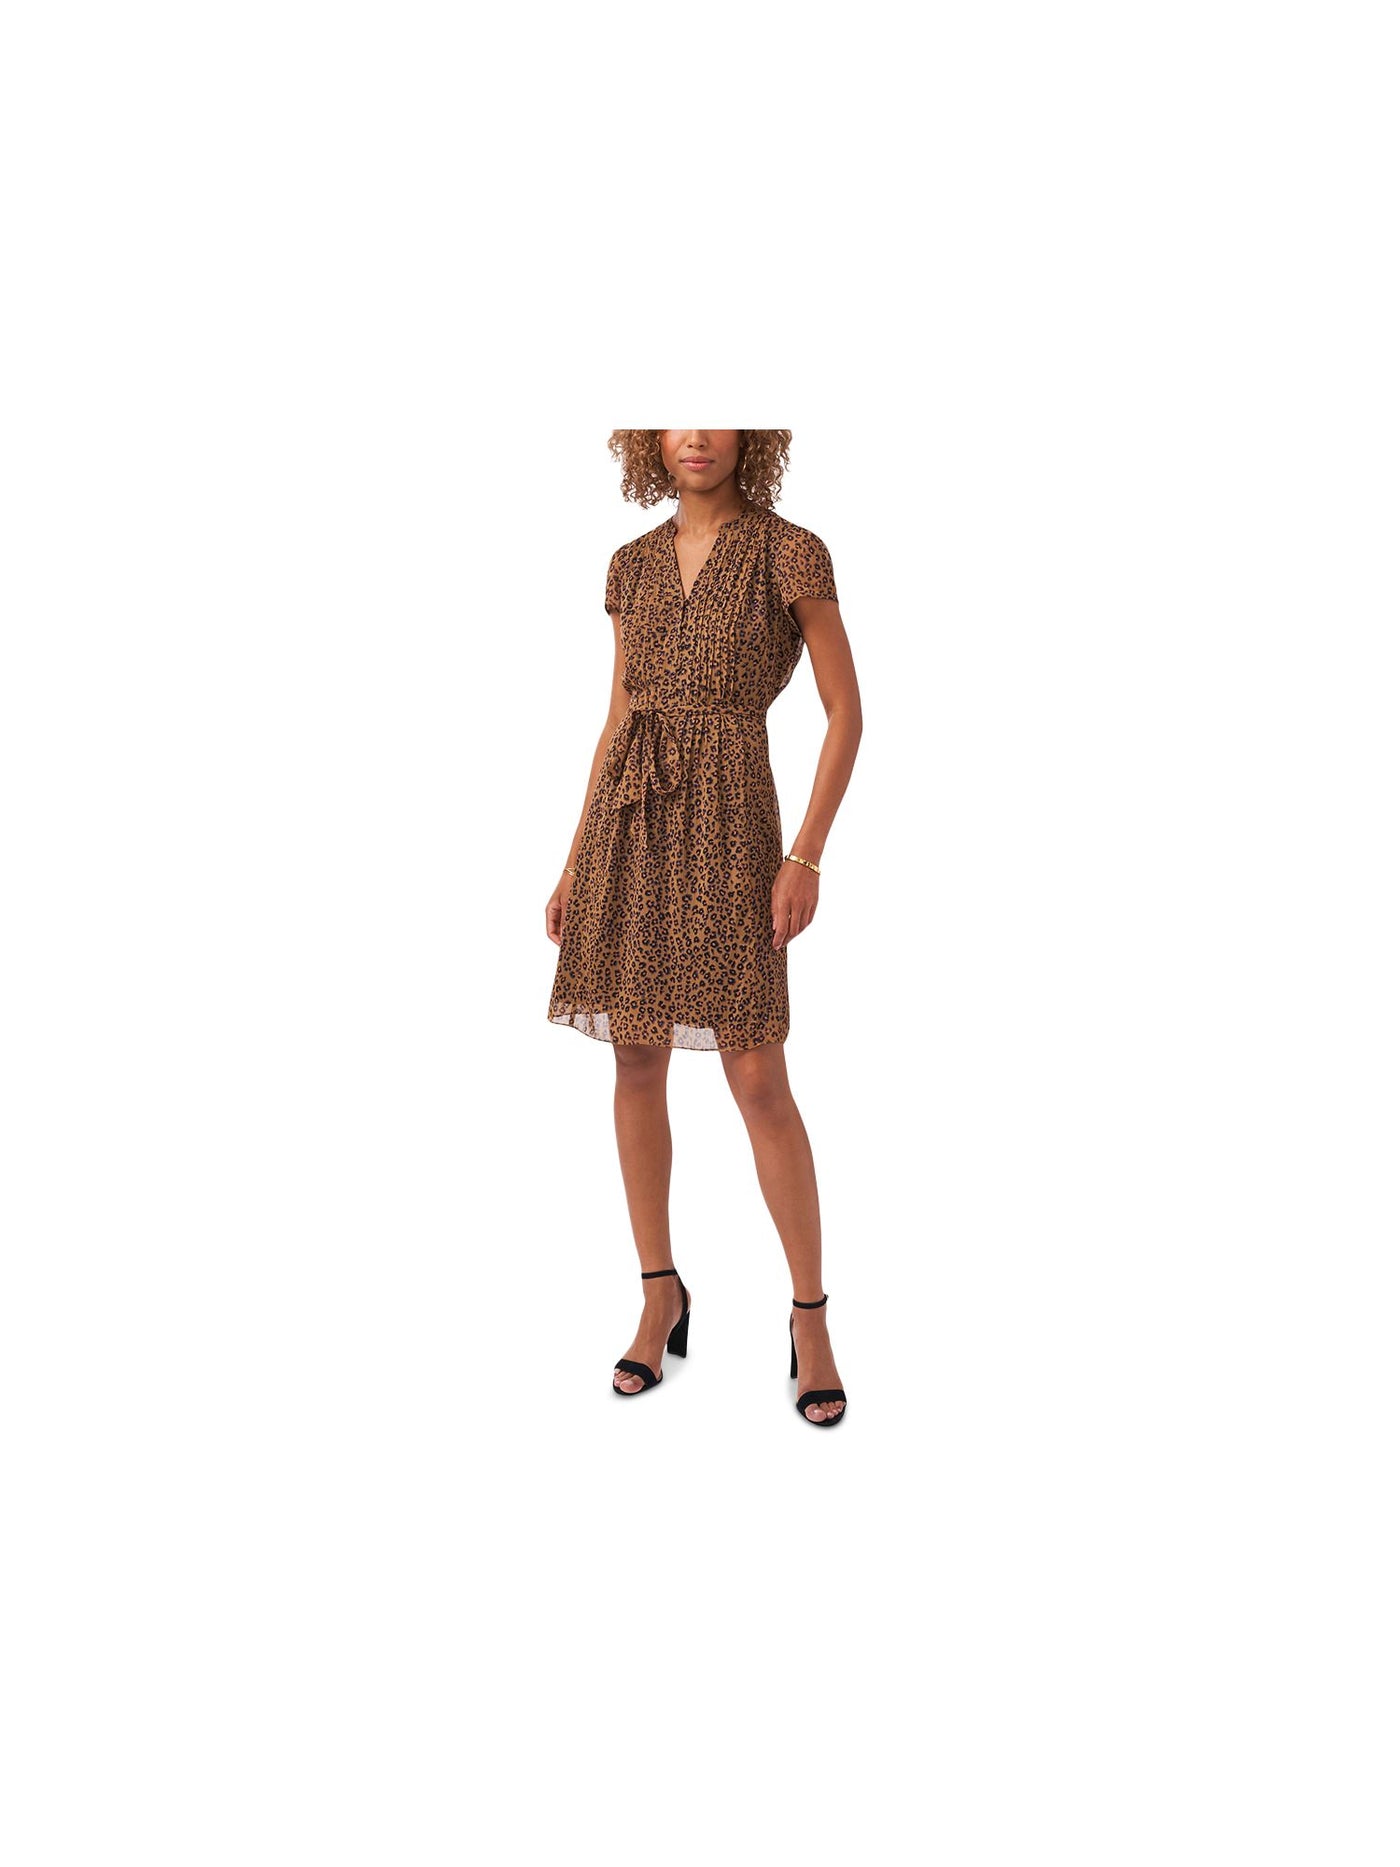 MSK PETITES Womens Brown Pleated Self Tie Belt Button Front Animal Print Short Sleeve V Neck Above The Knee Cocktail Shift Dress Petites 16P